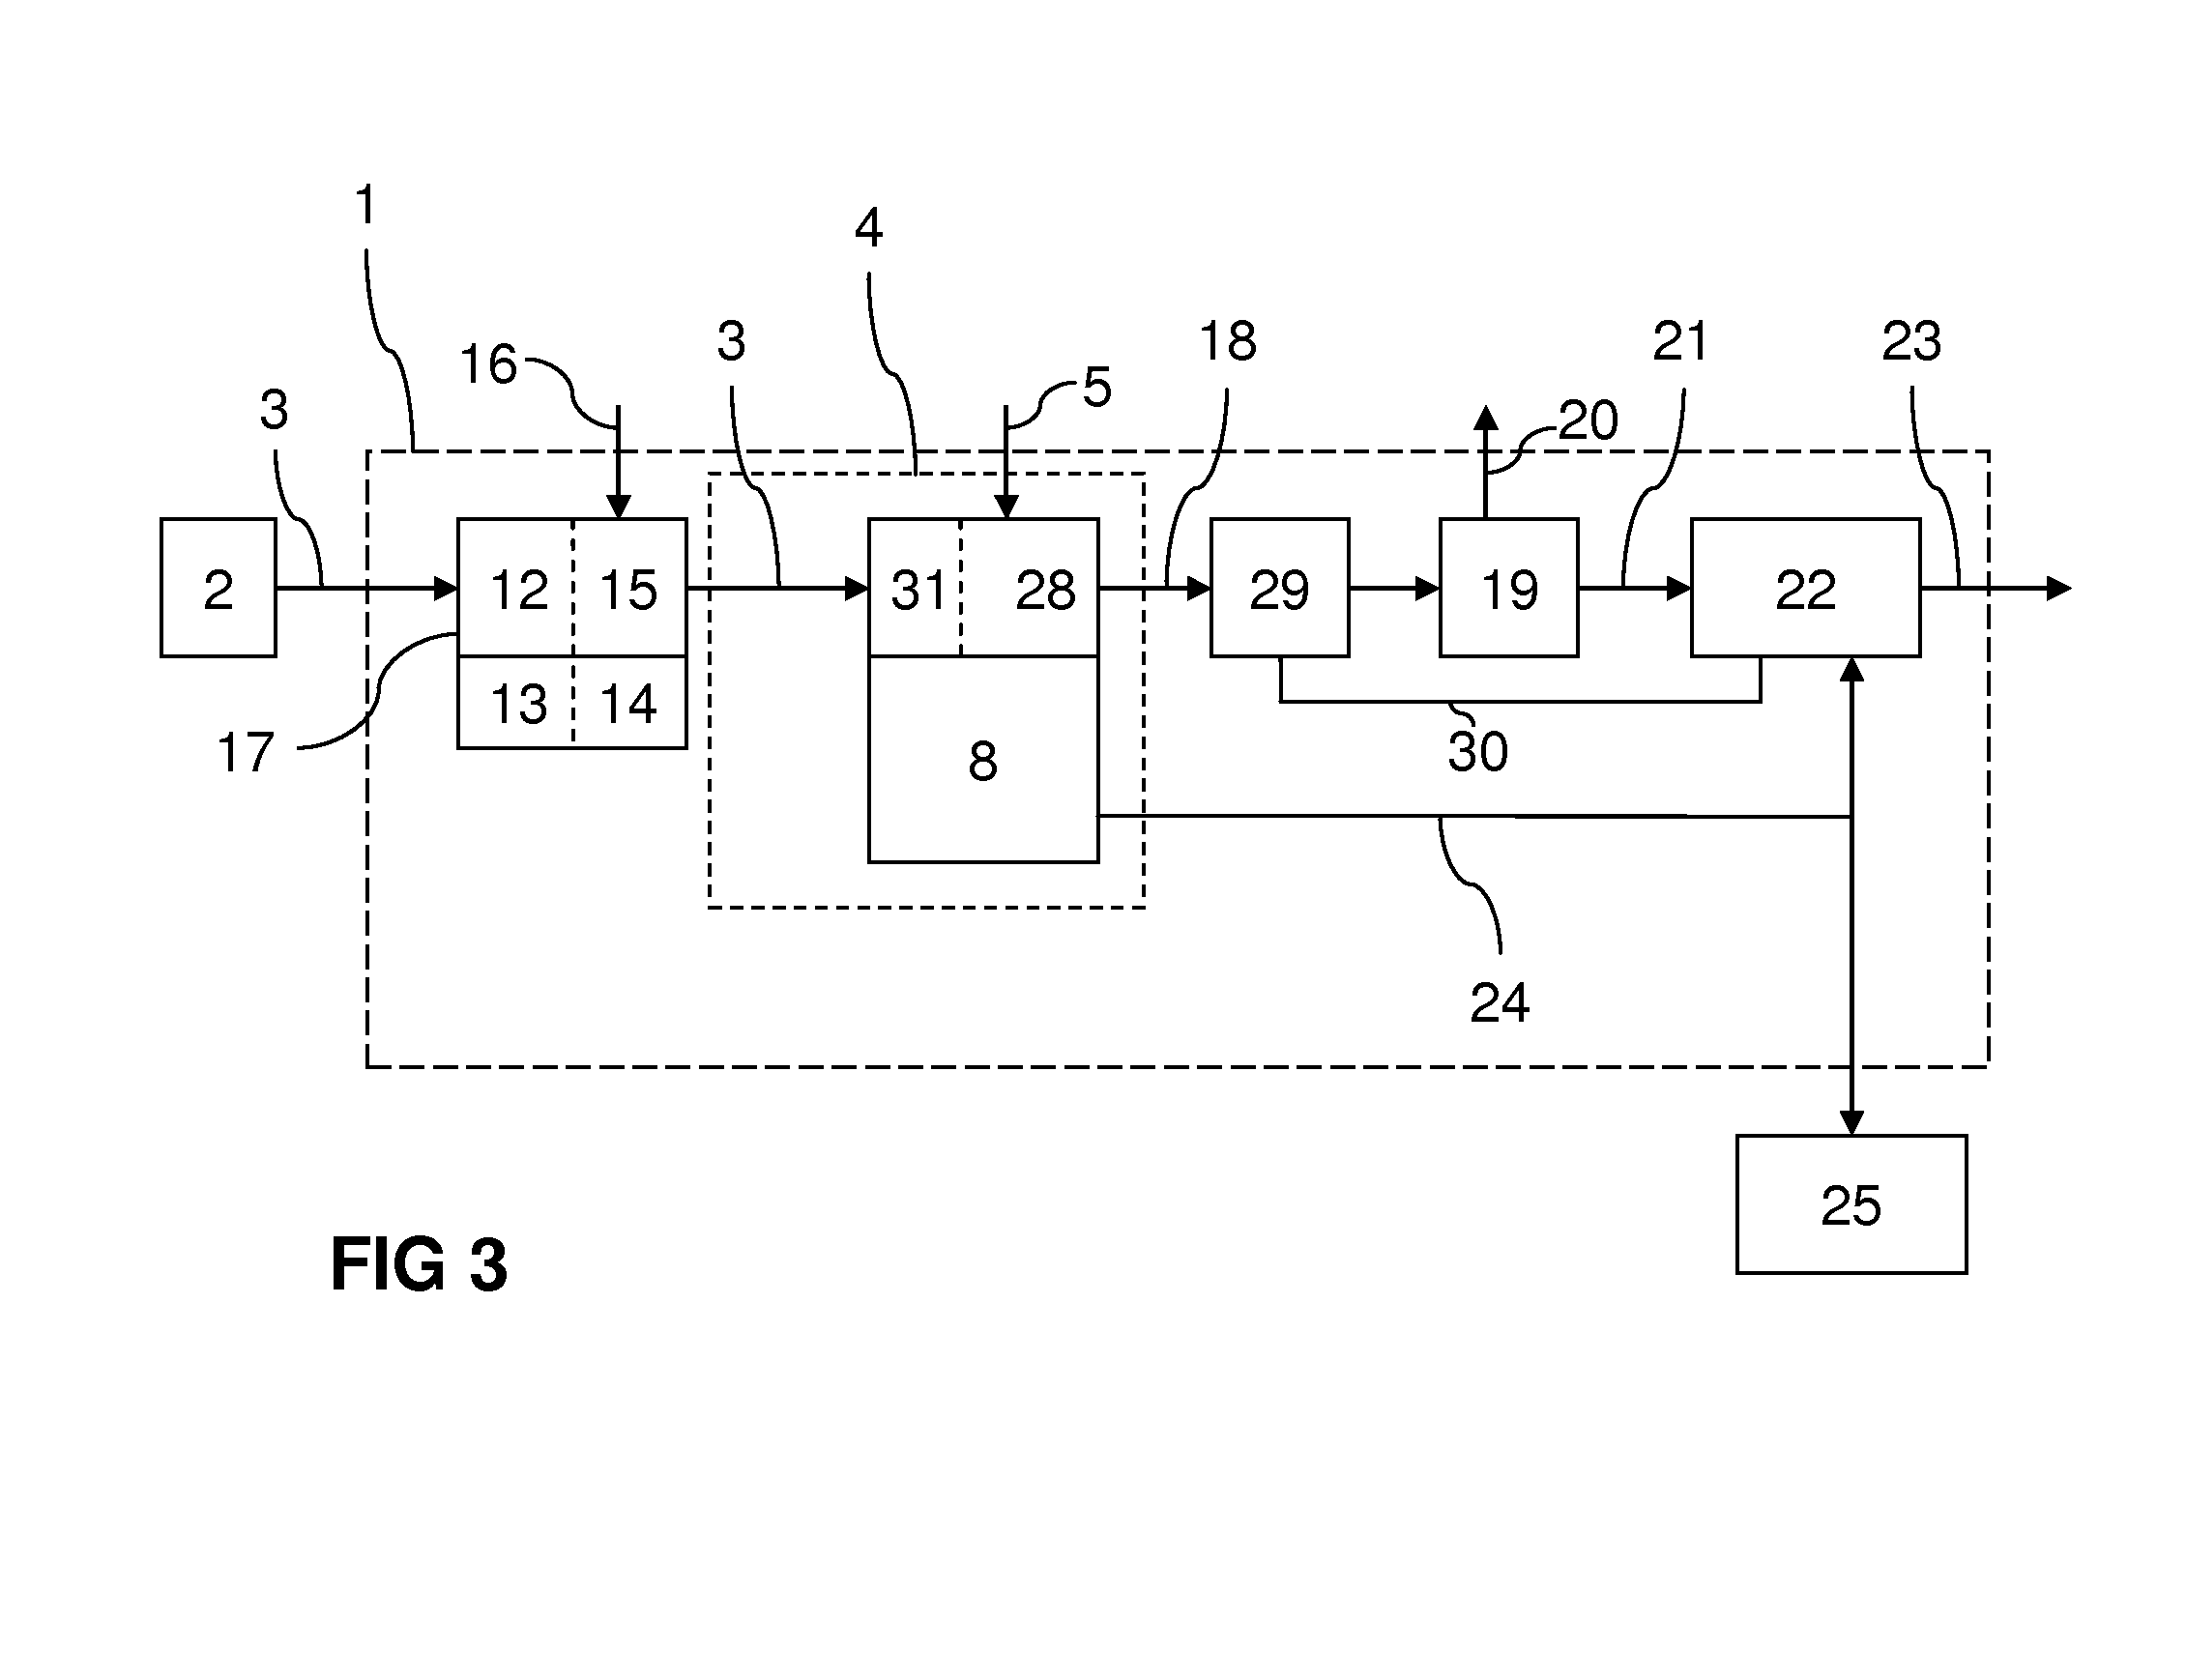 Method and device for generating electricity and gypsum from waste gases containing hydrogen sulfide